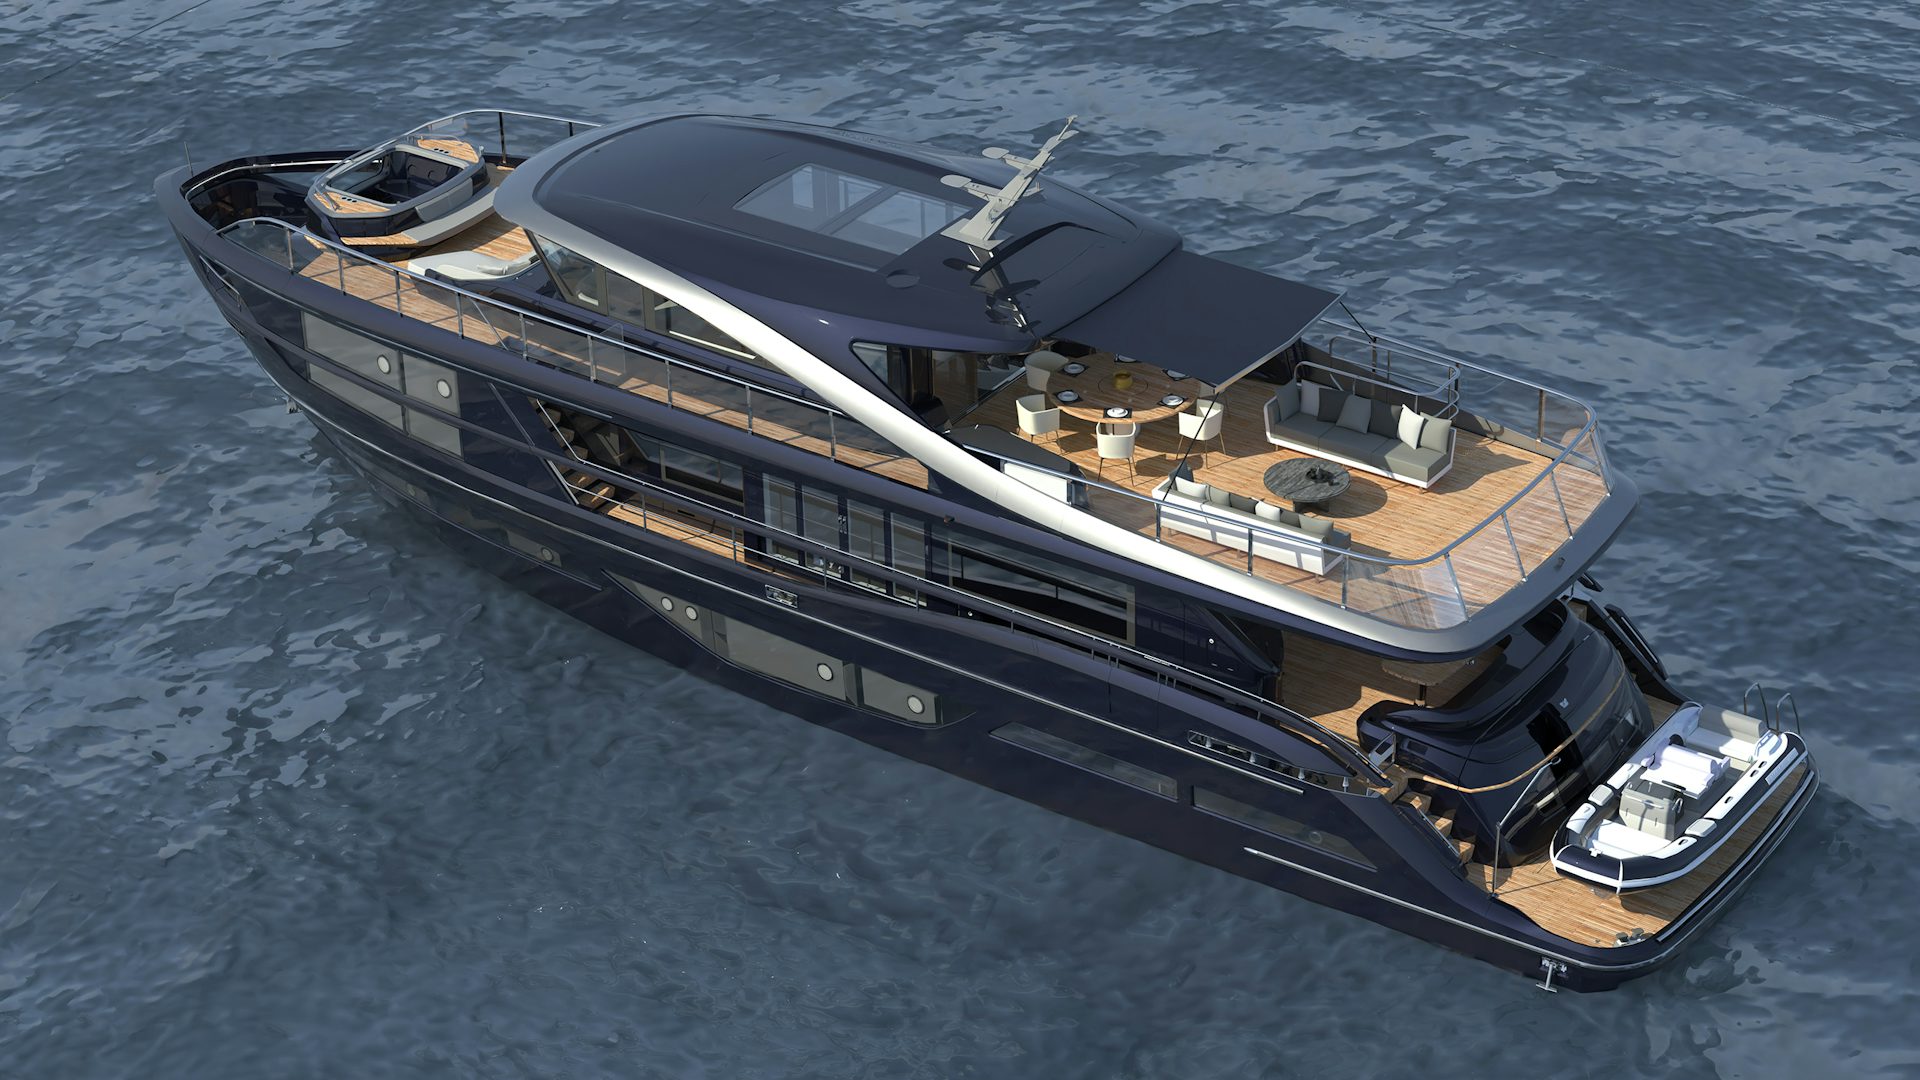 3D rendering of a black yacht on the water.